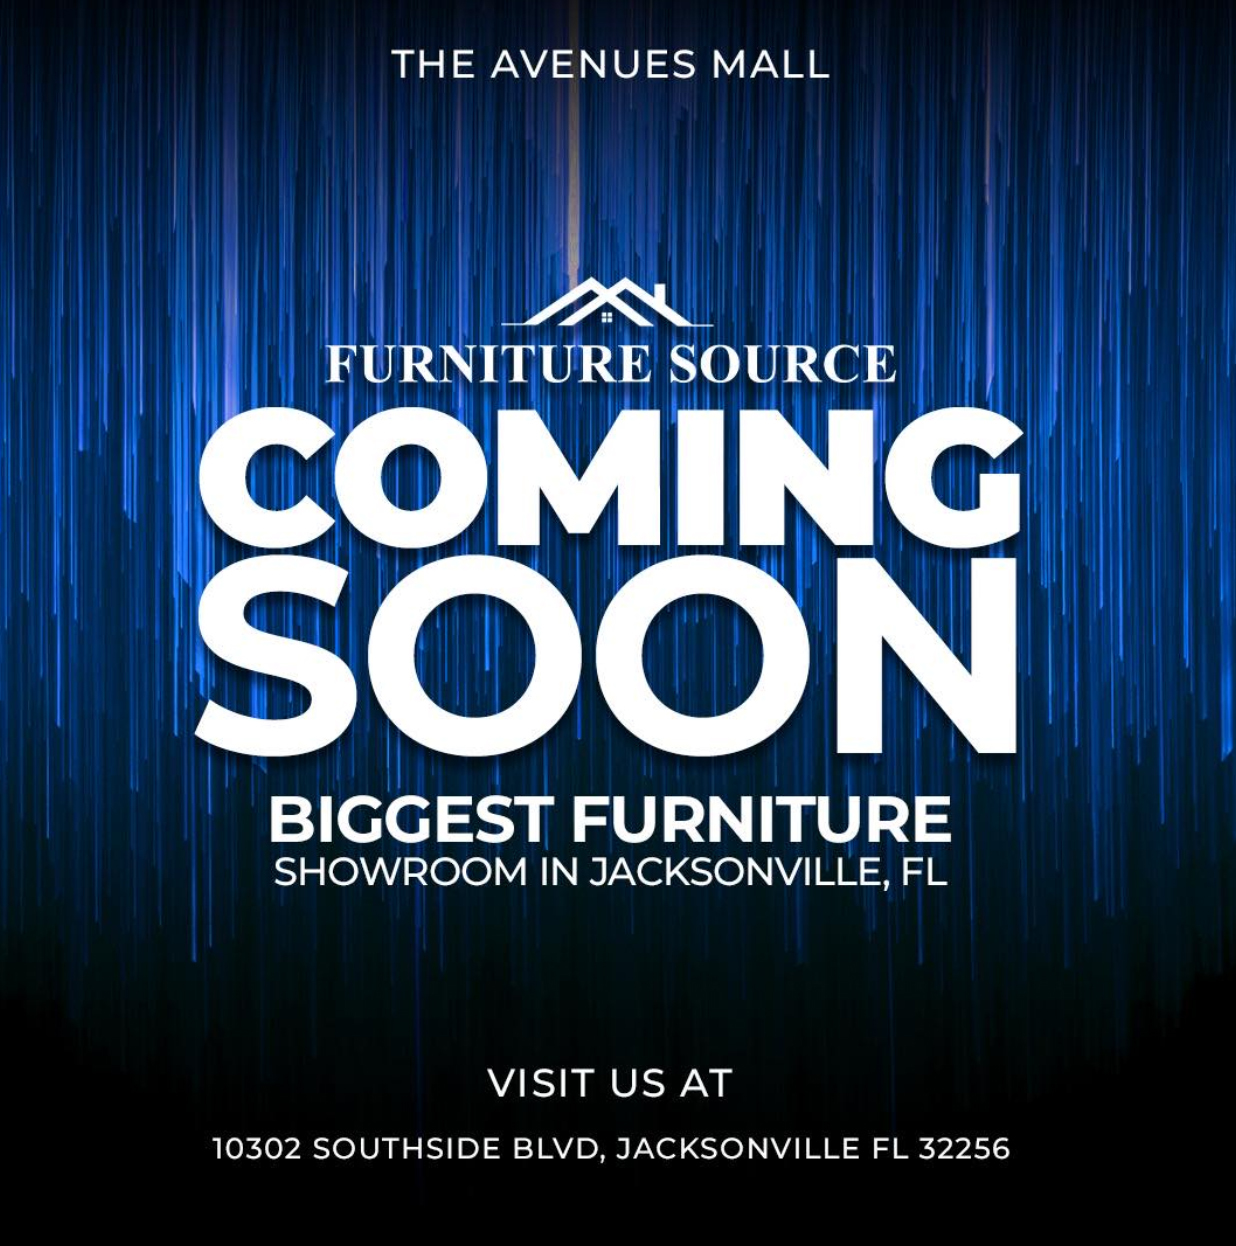 The image on the Furniture Source Jacksonville Facebook page.